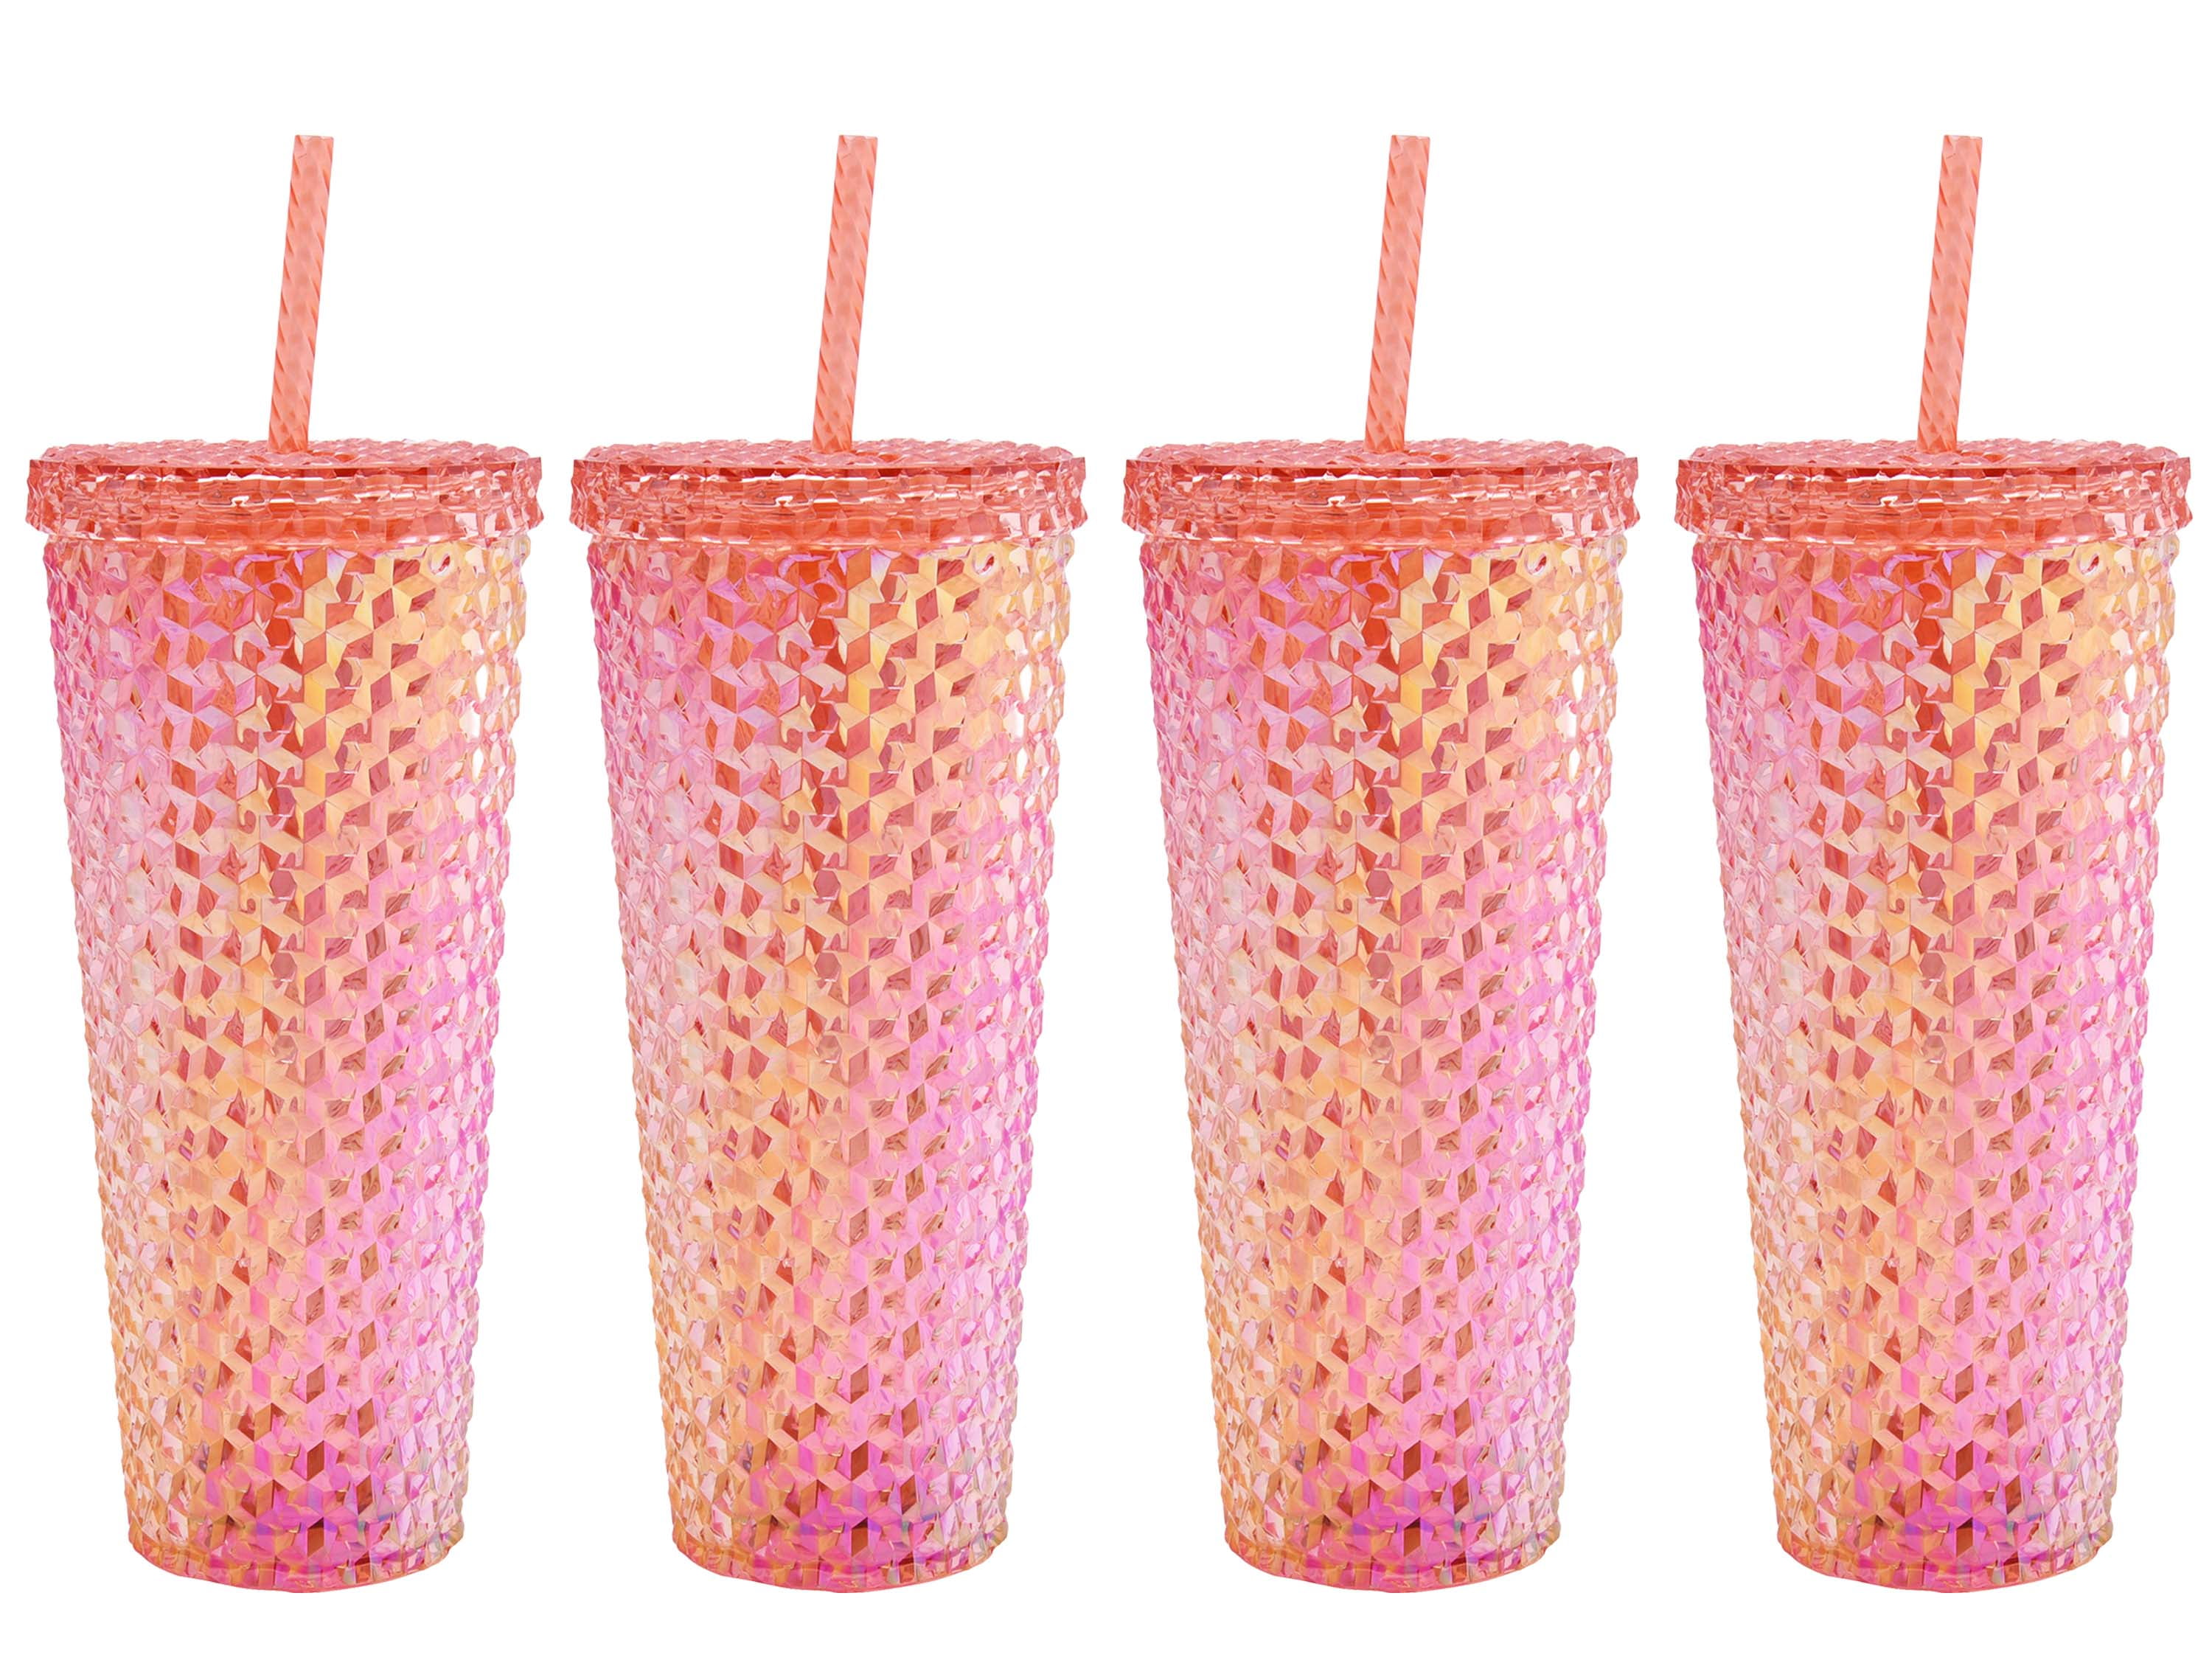 Mainstays 4-Pack Holiday Time Christmas Tumblers with Figural Straw $13.31  (Reg. $24) - $3.33/26 Oz Tumbler - Fabulessly Frugal